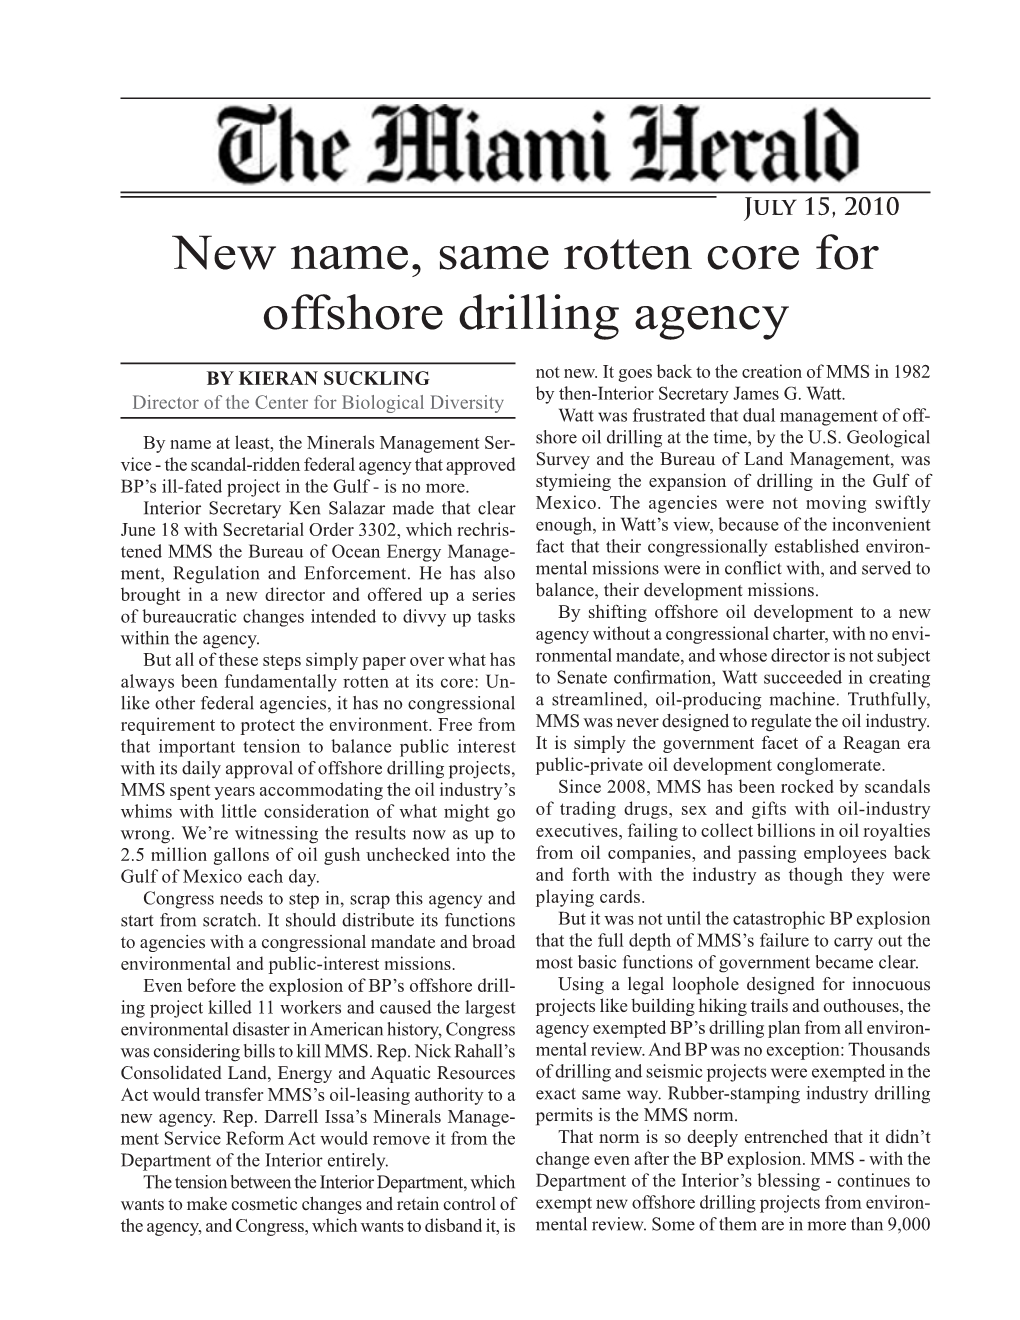 New Name, Same Rotten Core for Offshore Drilling Agency